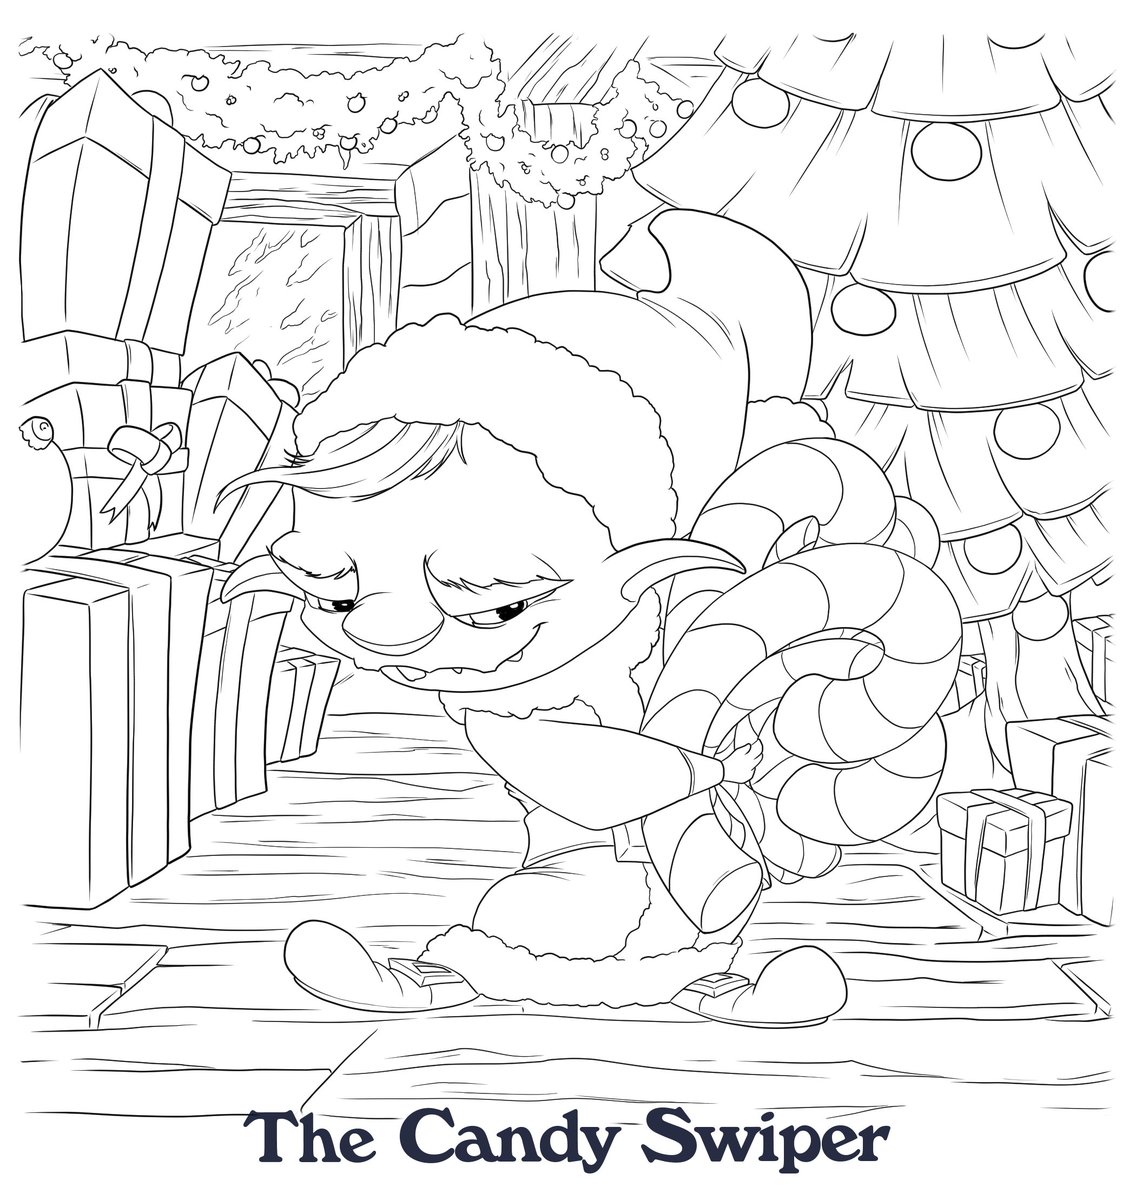 looking for #mischief ❓
Explore your imagination coloring in this Candy Swiper!
🎨Use any medium you like
Post your Entry in #Discord by 12.30🎄
- link in bio 🍬

Have fun! 🎁🎨🎄
#FluffleFam #Holiday #Activities #coloringbook #color #Christmas #kidsactivity #fun #love #merry